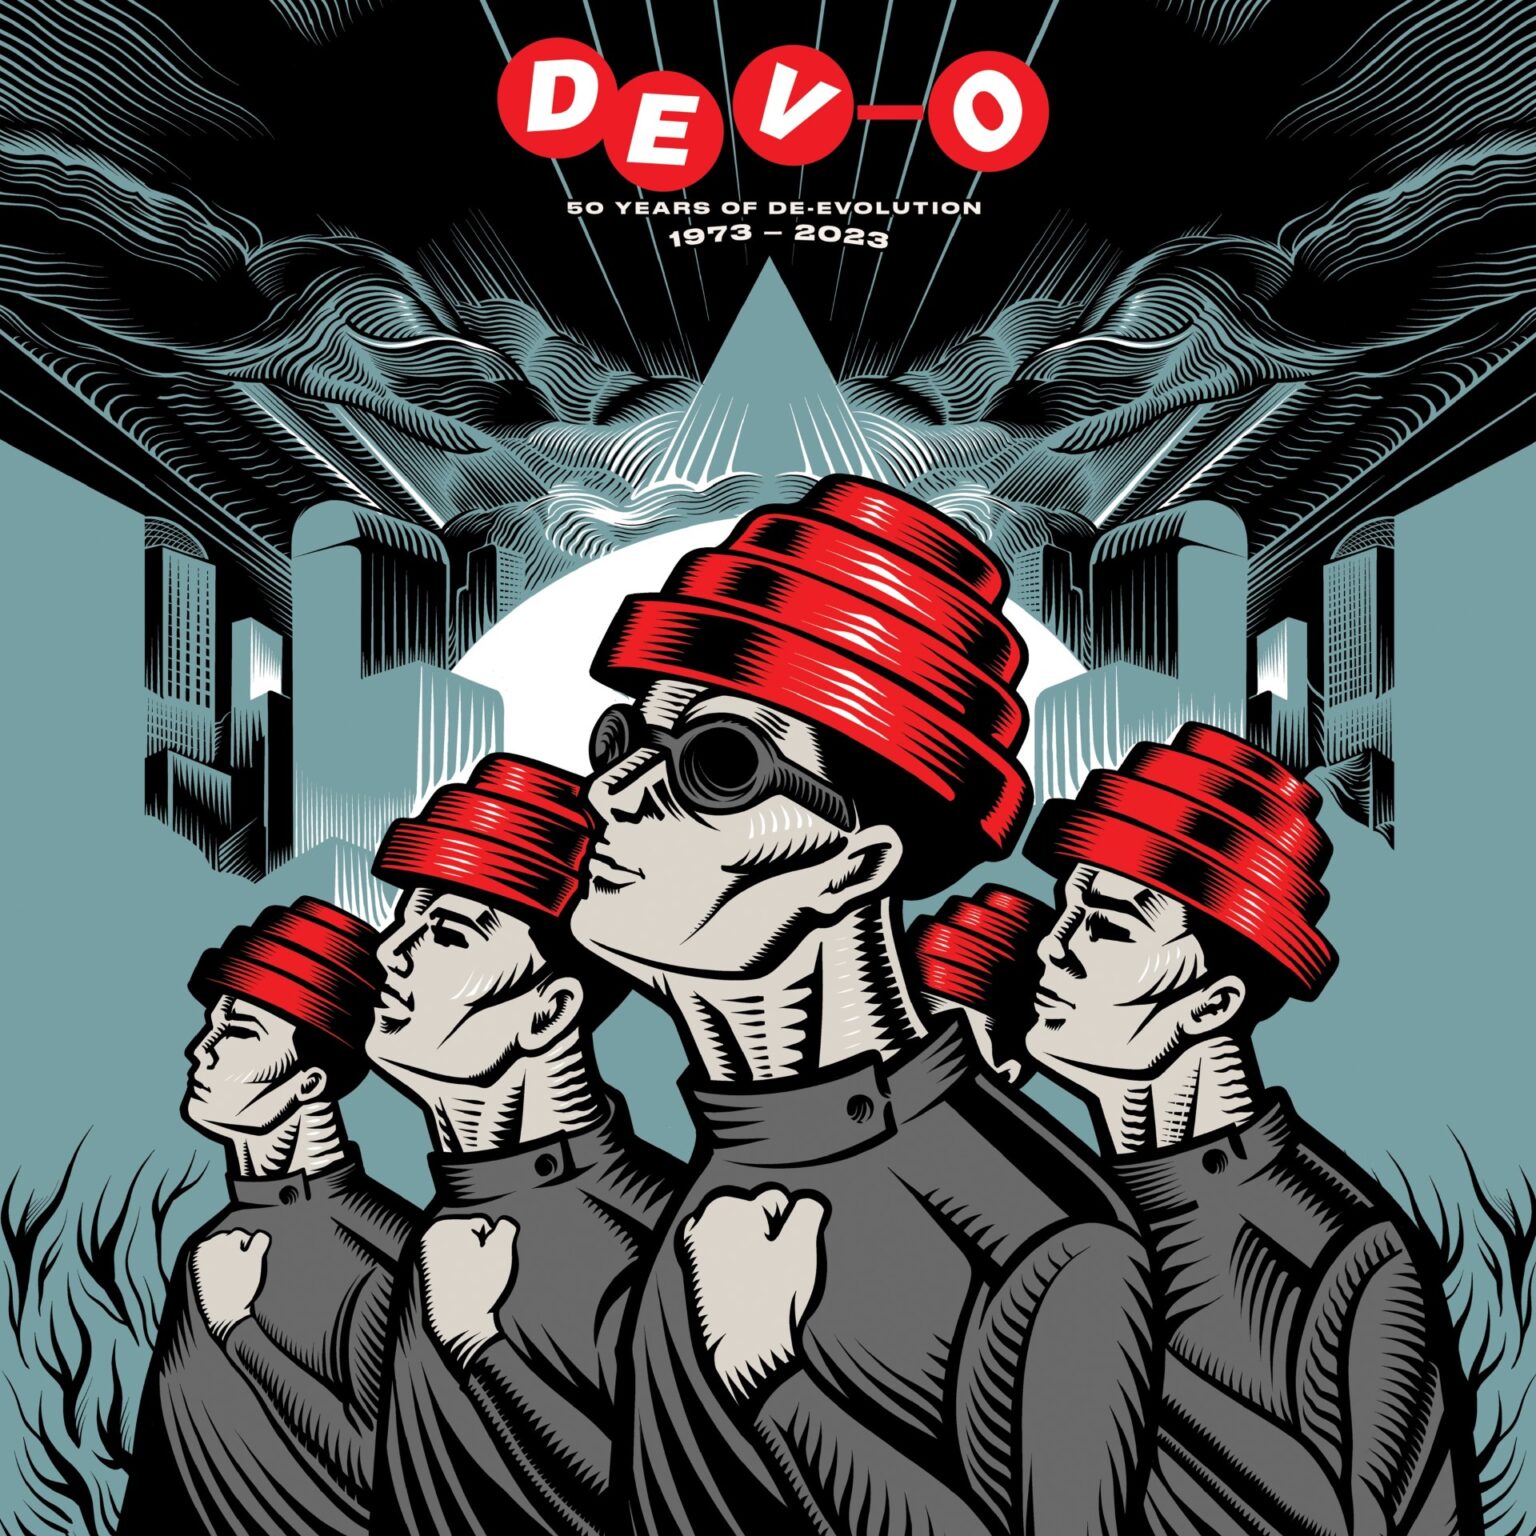 DEVO Defined With Collection Box 50 Years Of DeEvolution 19732023